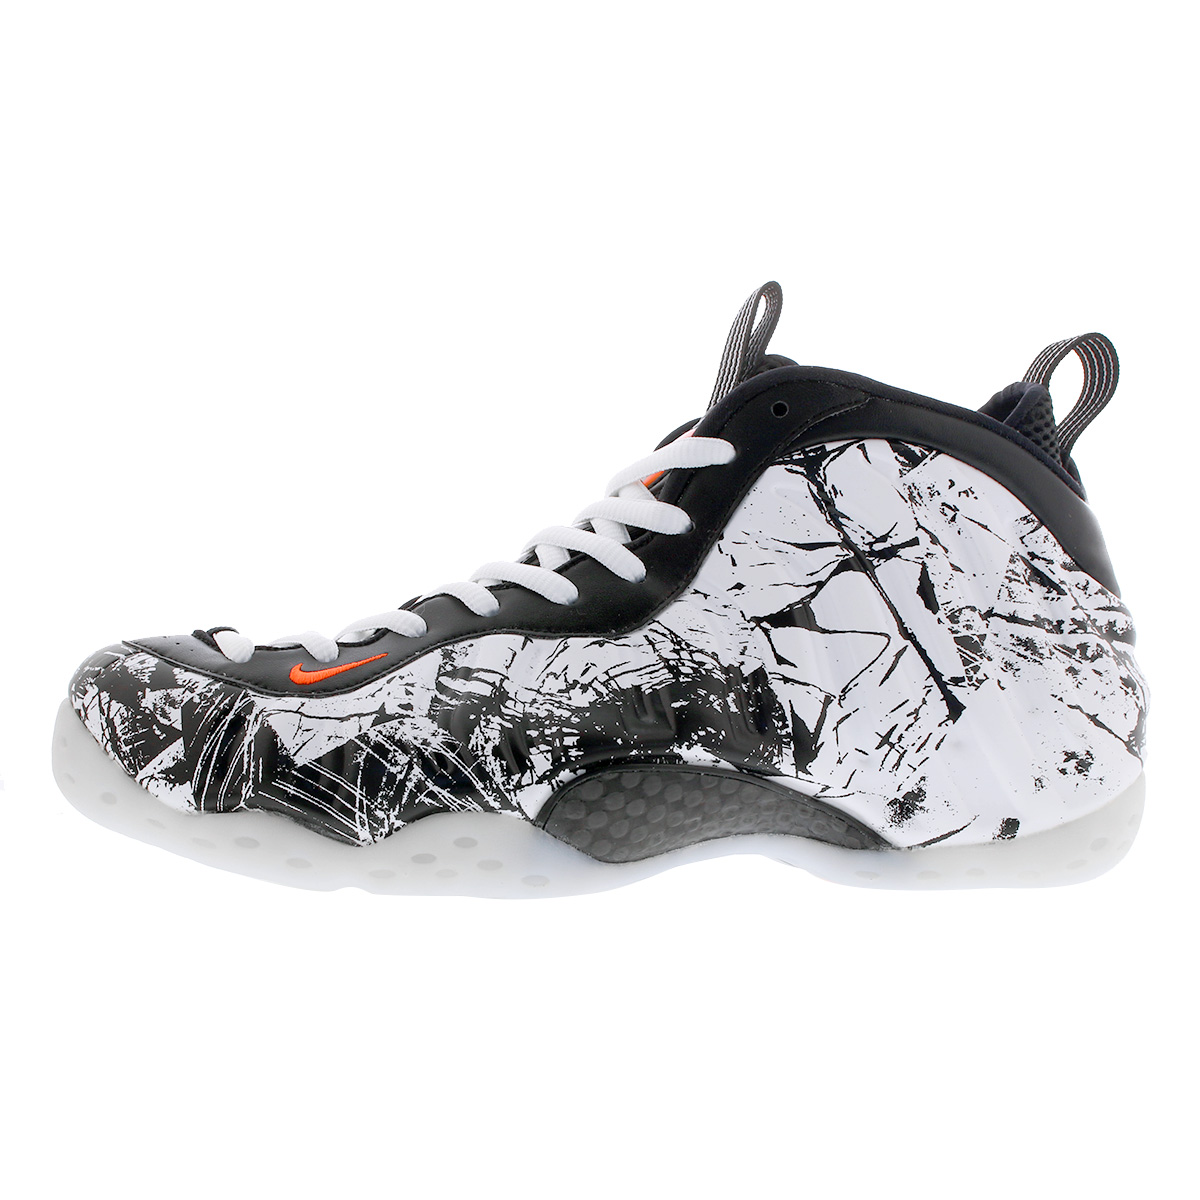 NIKE AIR FOAMPOSITE ONE ナイキ エア フォームポジット ワン BLACK/WHITE/TOTAL ORANGE  【SHATTERED BACKBOARD】 314996-013 | SELECT SHOP LOWTEX